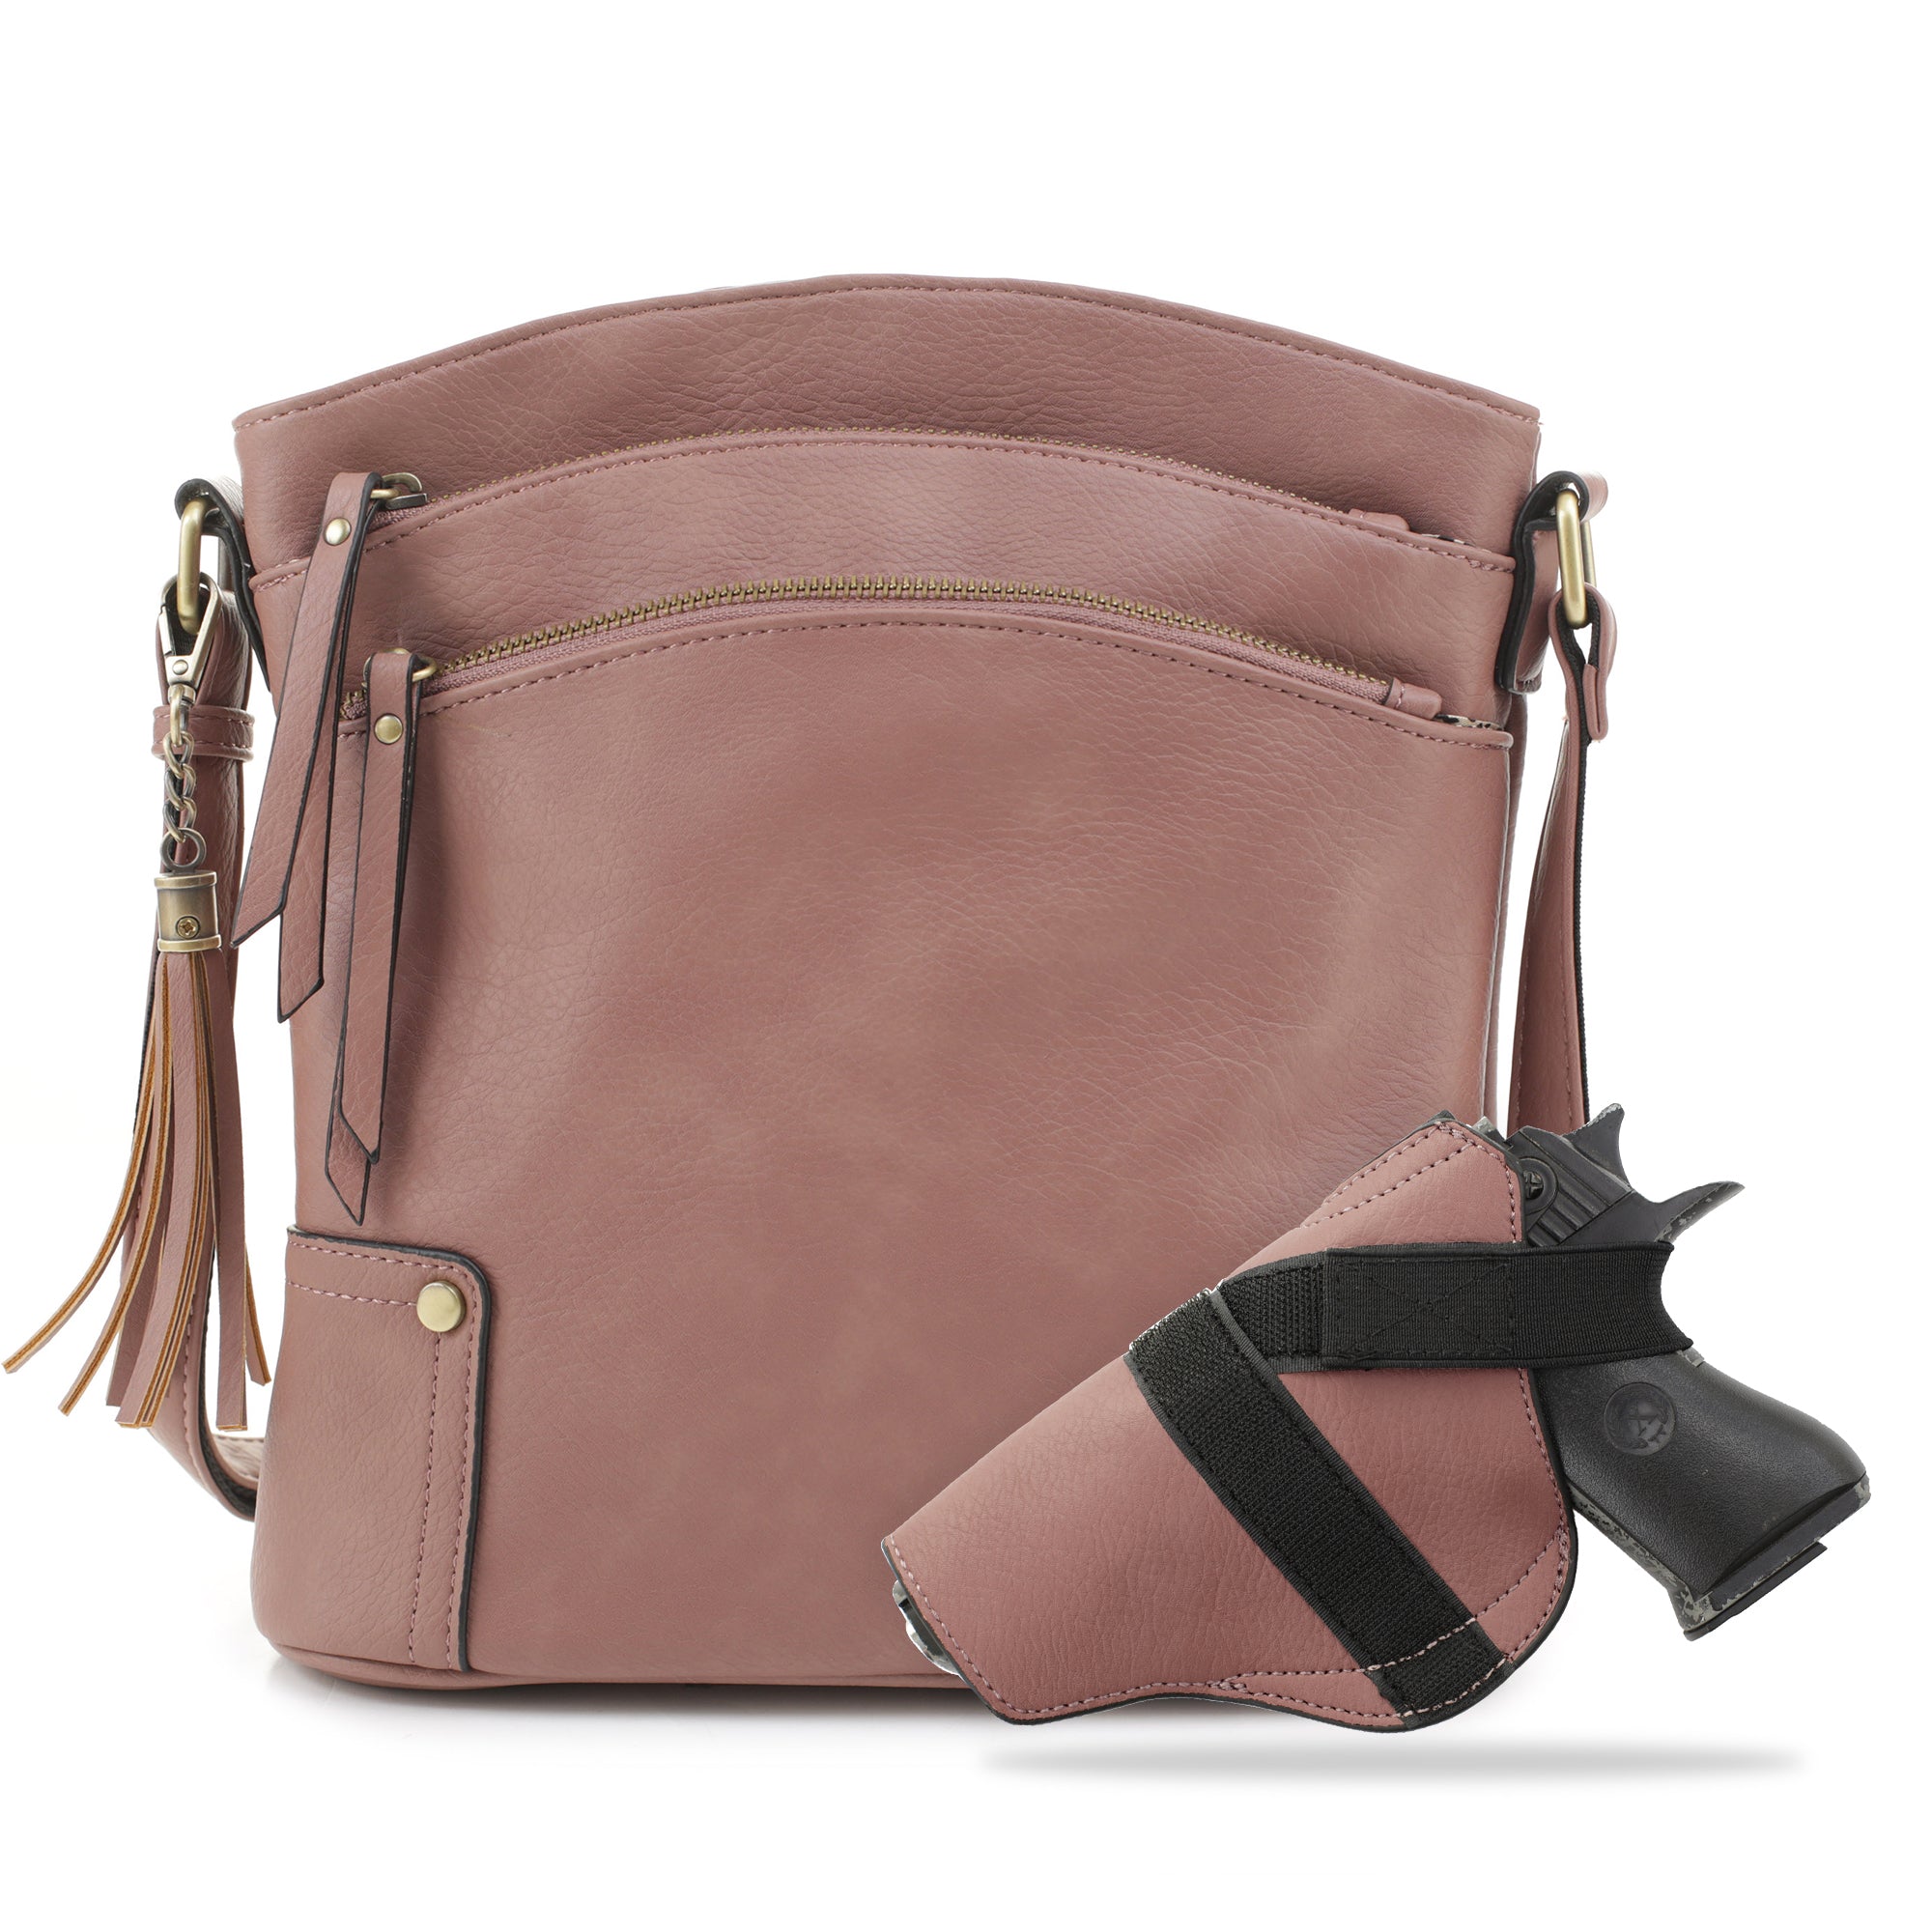 Hobo Crossbody Bag, Leather Purse | Mayko Bags Camel / Yes Lining for Me